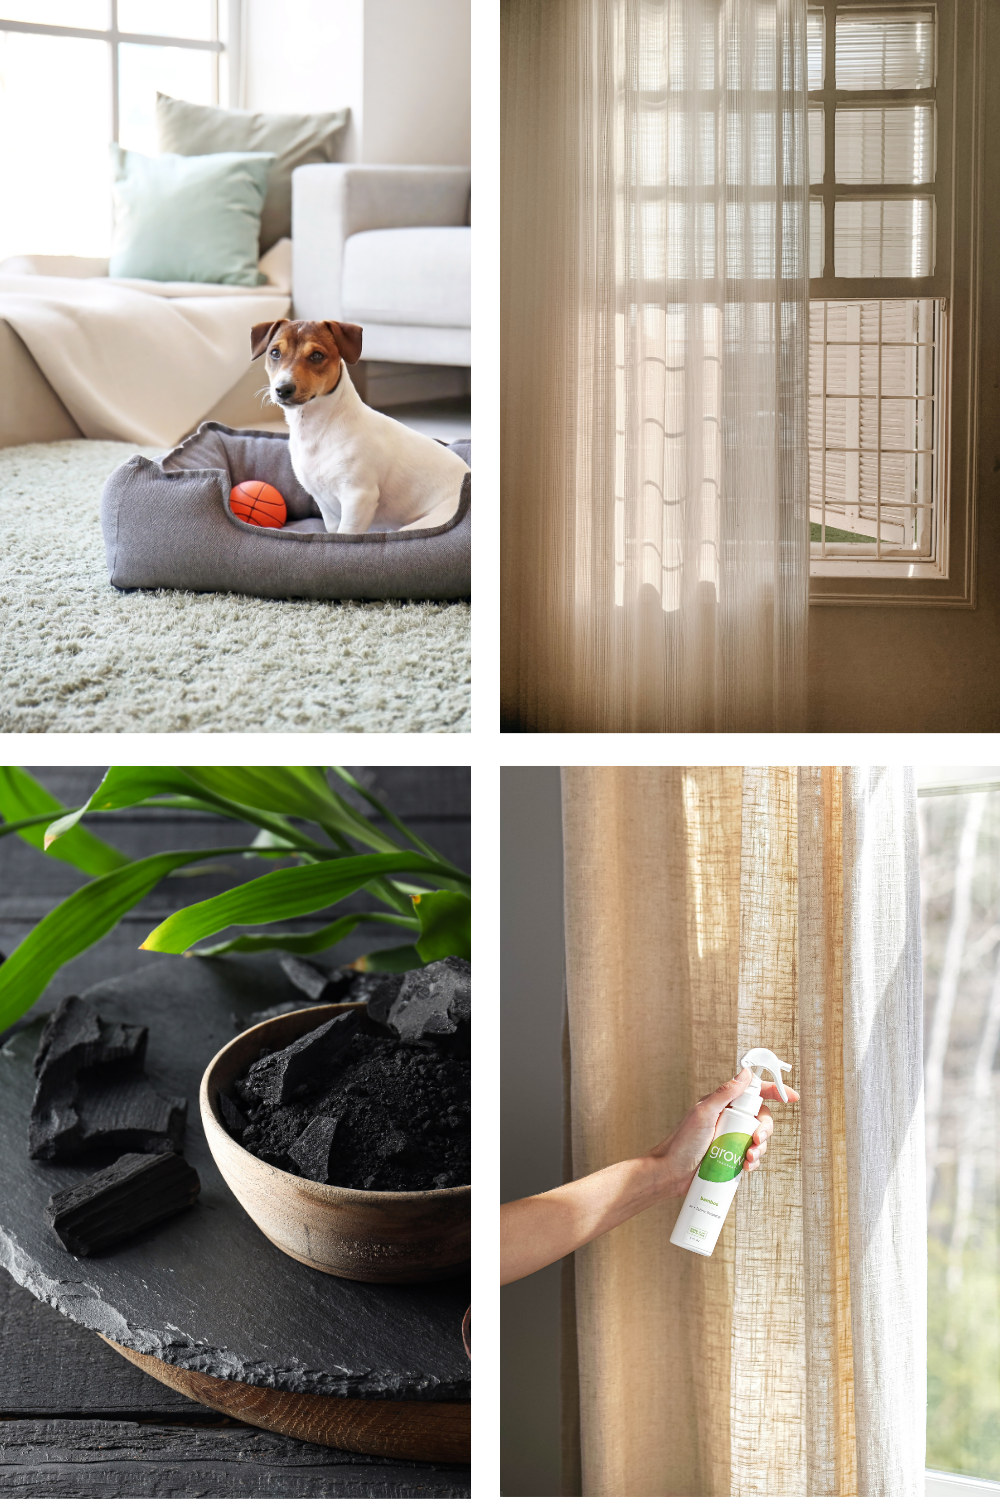 A clean pet's living area, well-ventilated home with open windows and a fan, natural odor absorbers like baking soda and activated charcoal, and pet-friendly air fresheners for a fresh-smelling home